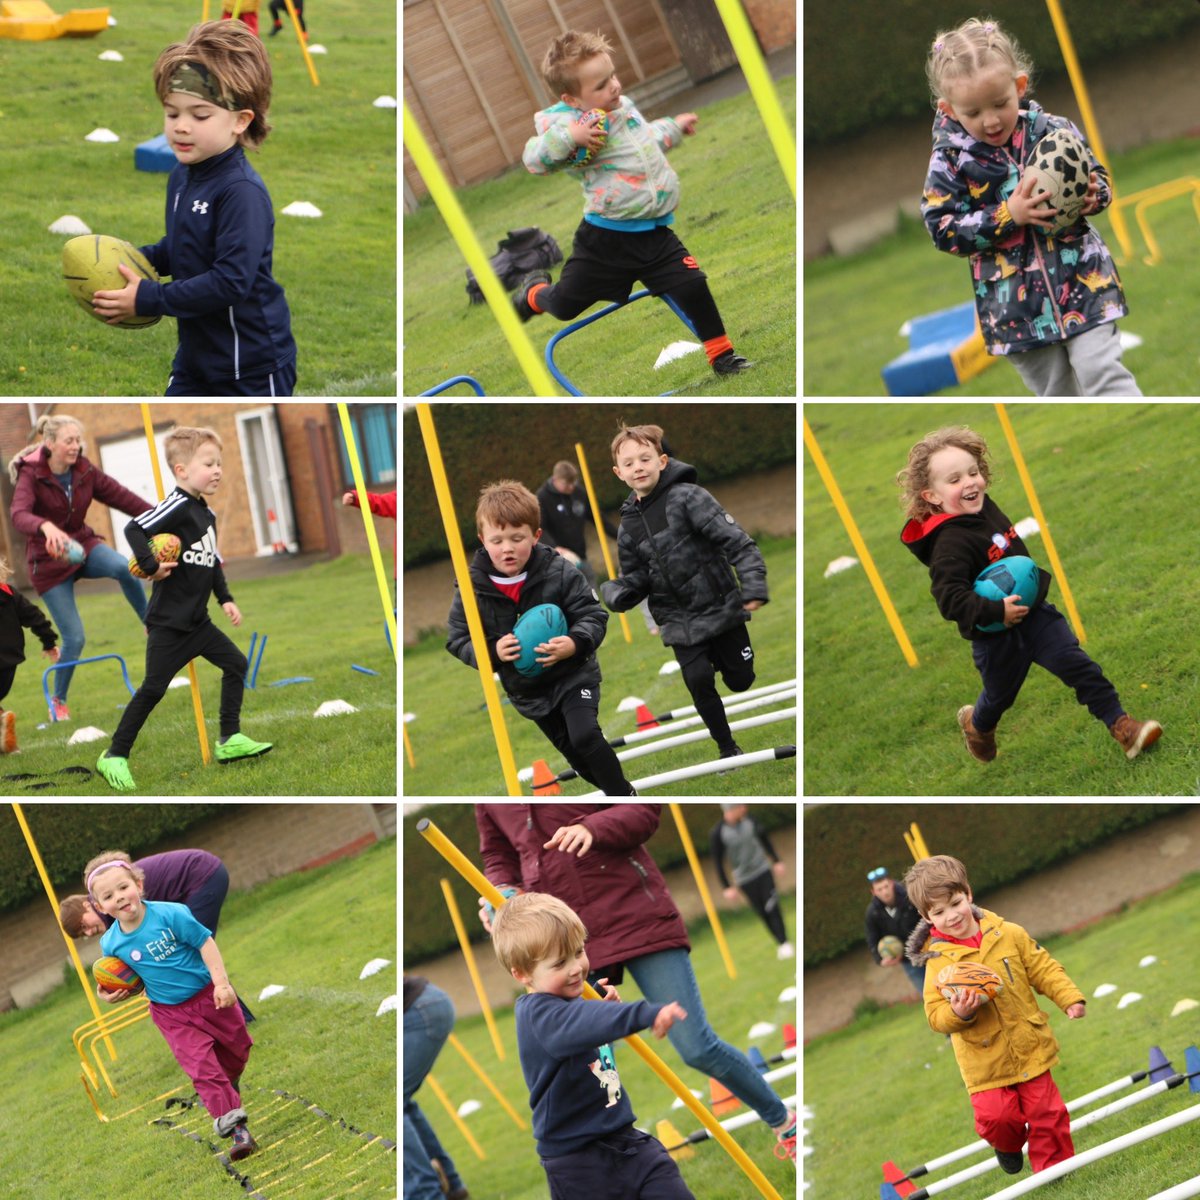 When coach Stewart says there is only ten seconds left so you give it 110% and run your socks off! Smashed it! #doncastersport #kidssport #rugbykids